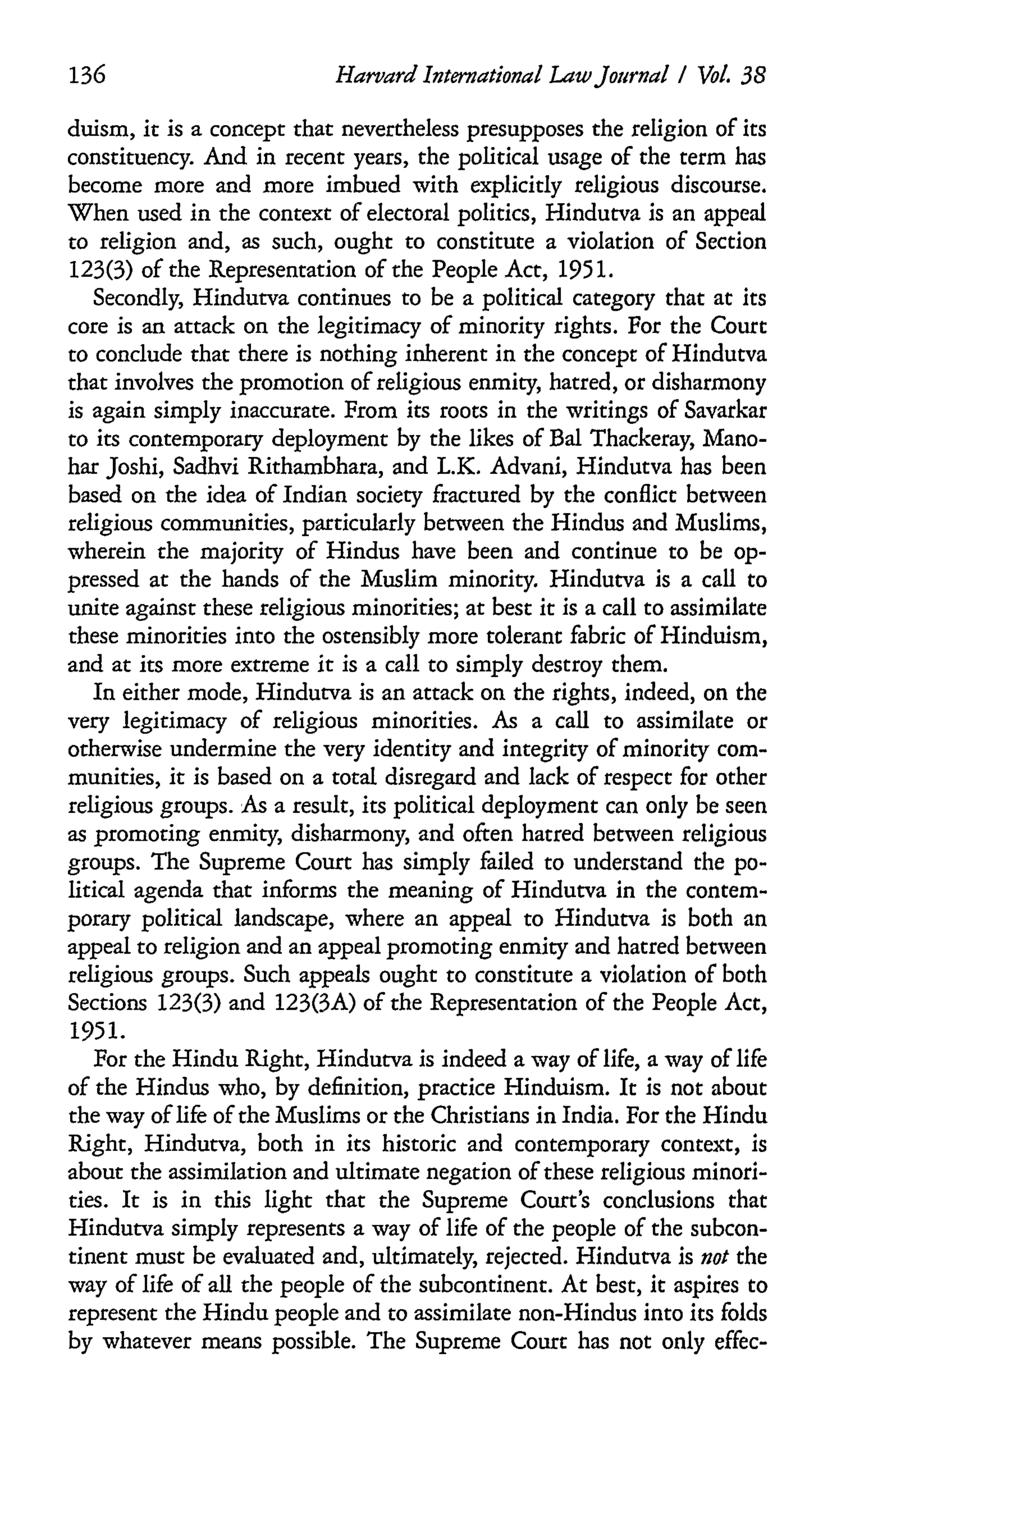 Harvard International Law Journal / Vol. 38 duism, it is a concept that nevertheless presupposes the religion of its constituency.